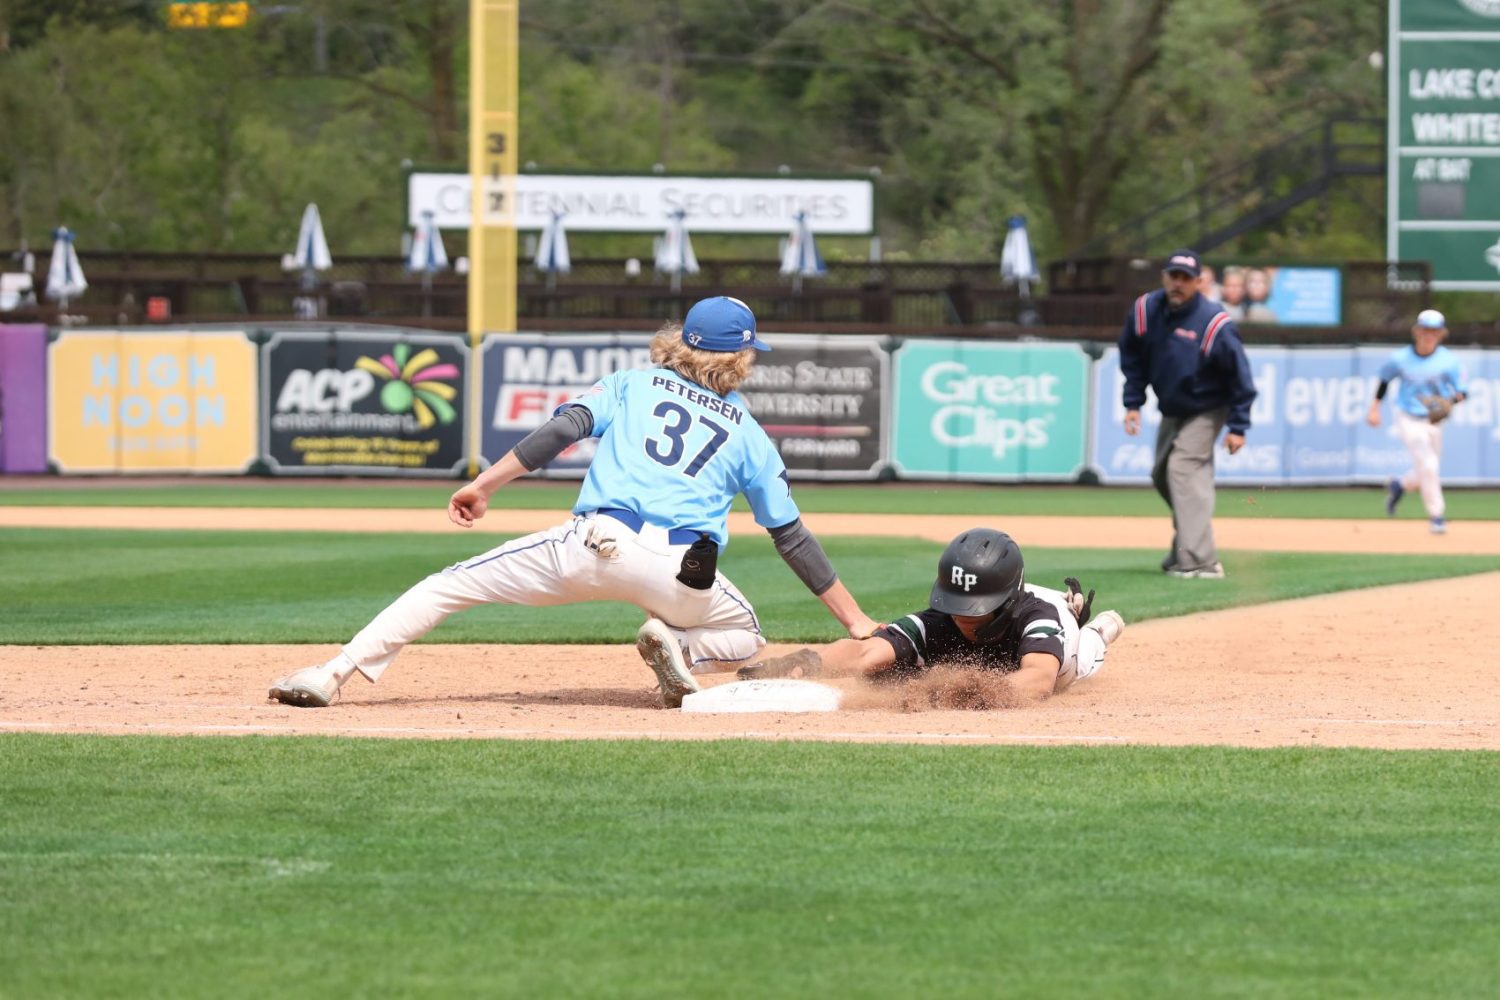 Reeths-Puffer takes down Montague twice in baseball twinbill at LMCU Ballpark